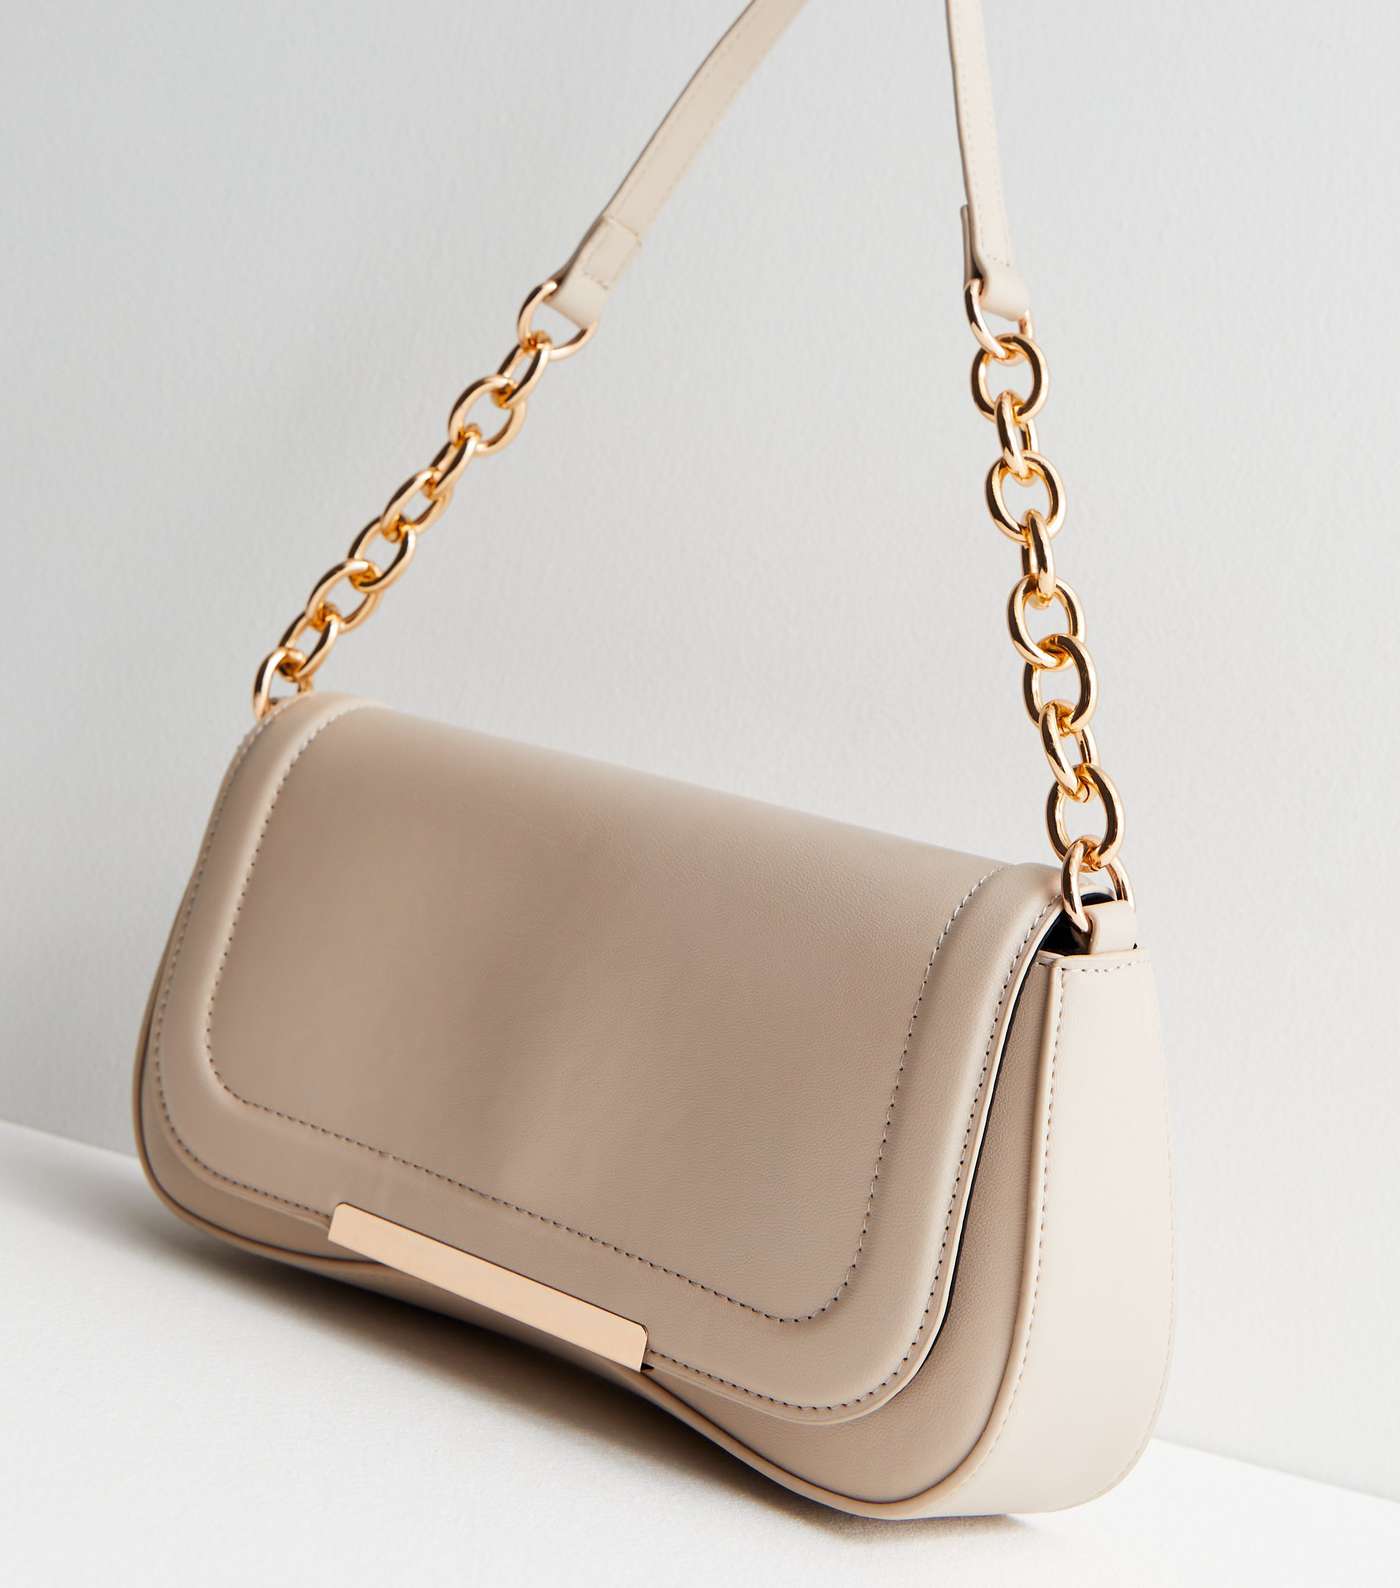 Cream Leather-Look Chain Shoulder Bag Image 3